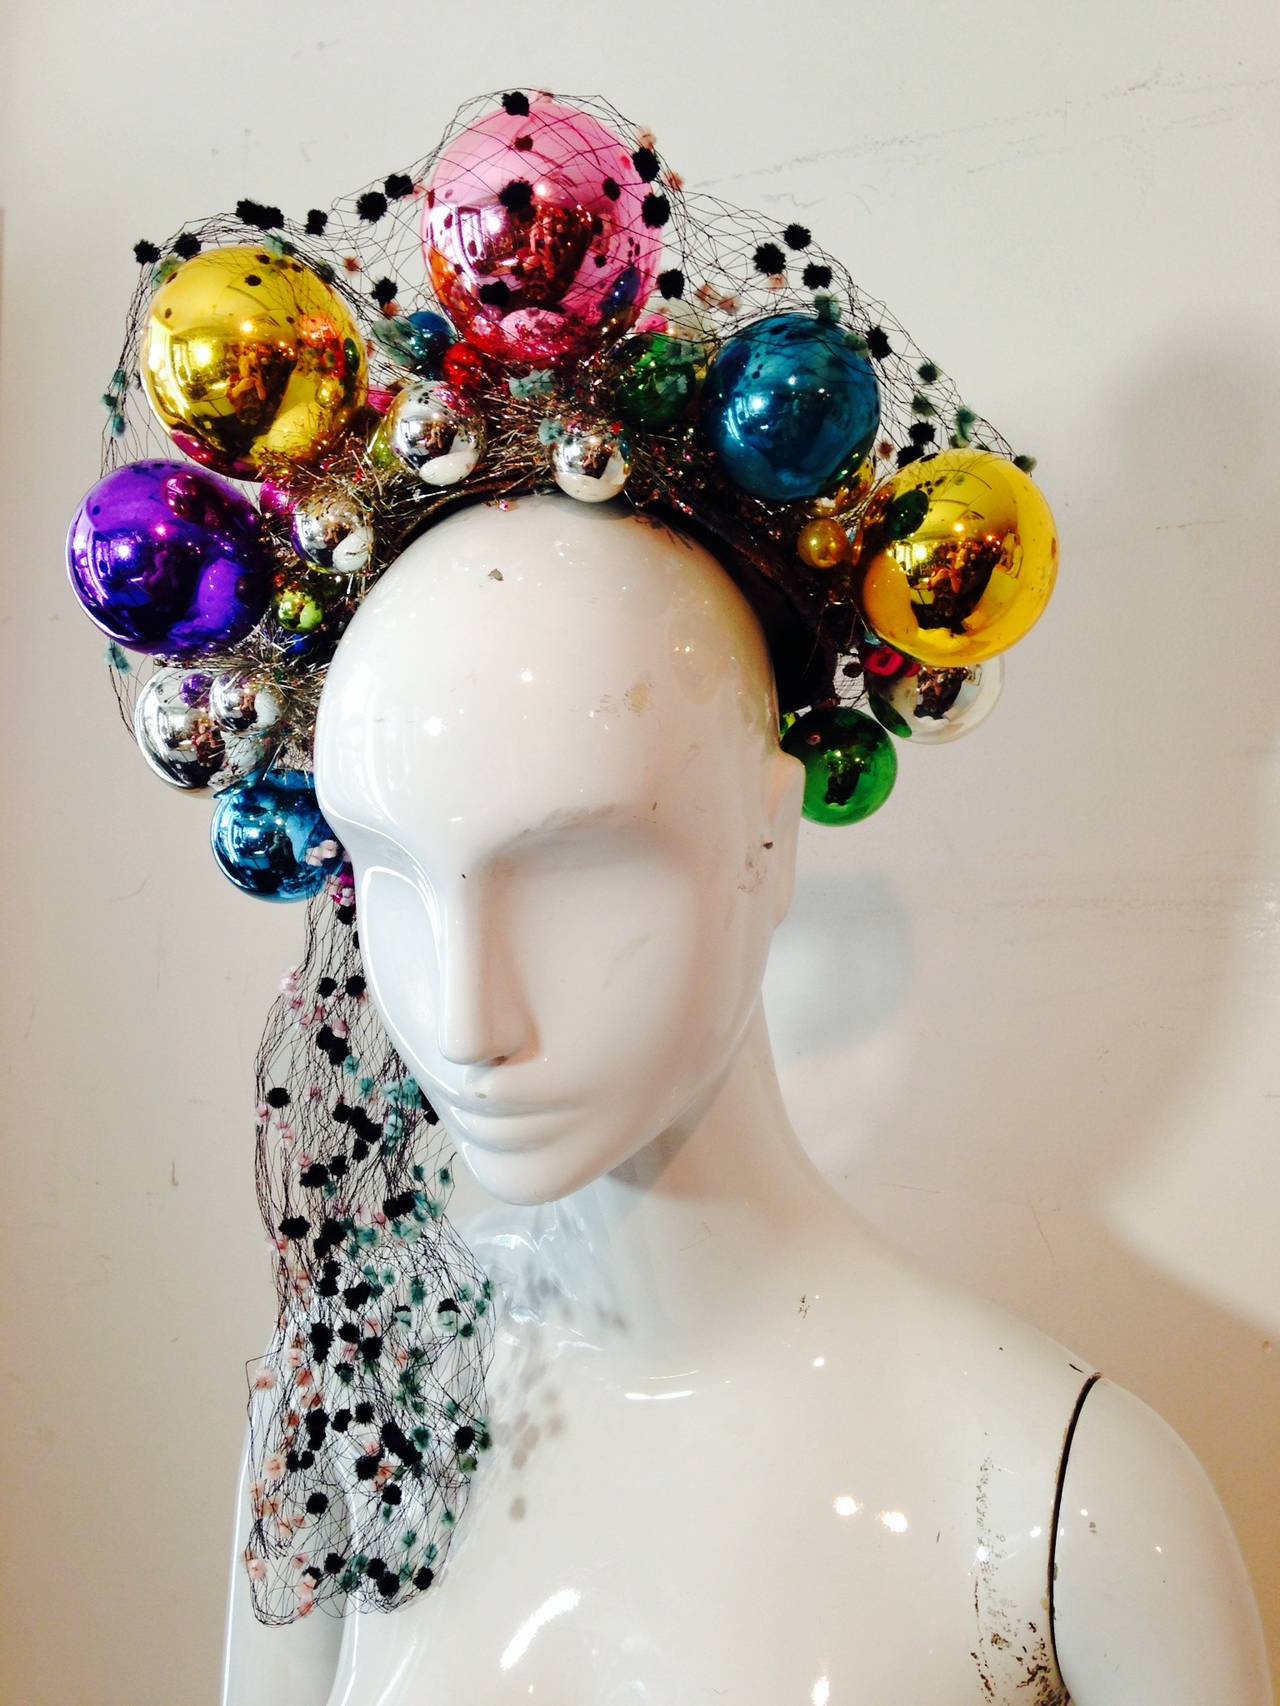 Be the hit of the party with this 1940s holiday hat!  From divine San Francisco milliner extraordinaire Irina Roublon comes this festive extravaganza of glass christmas ball ornaments, lame, tinsel and veiling. Combs attach this so it stands up like